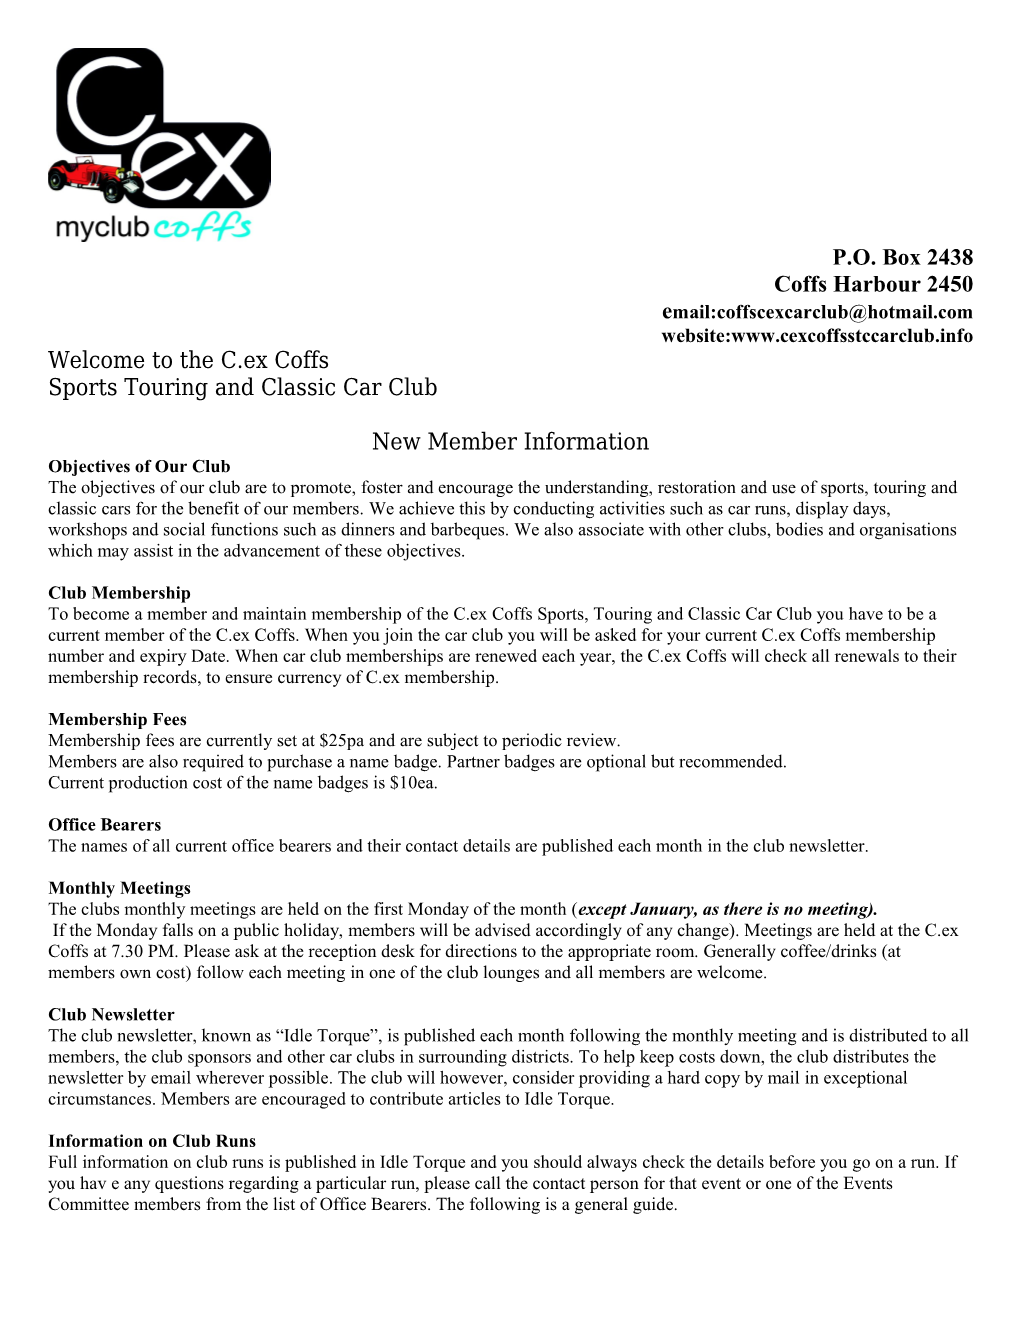 Coffs Ex Services Sports Touring and Classic Car Club